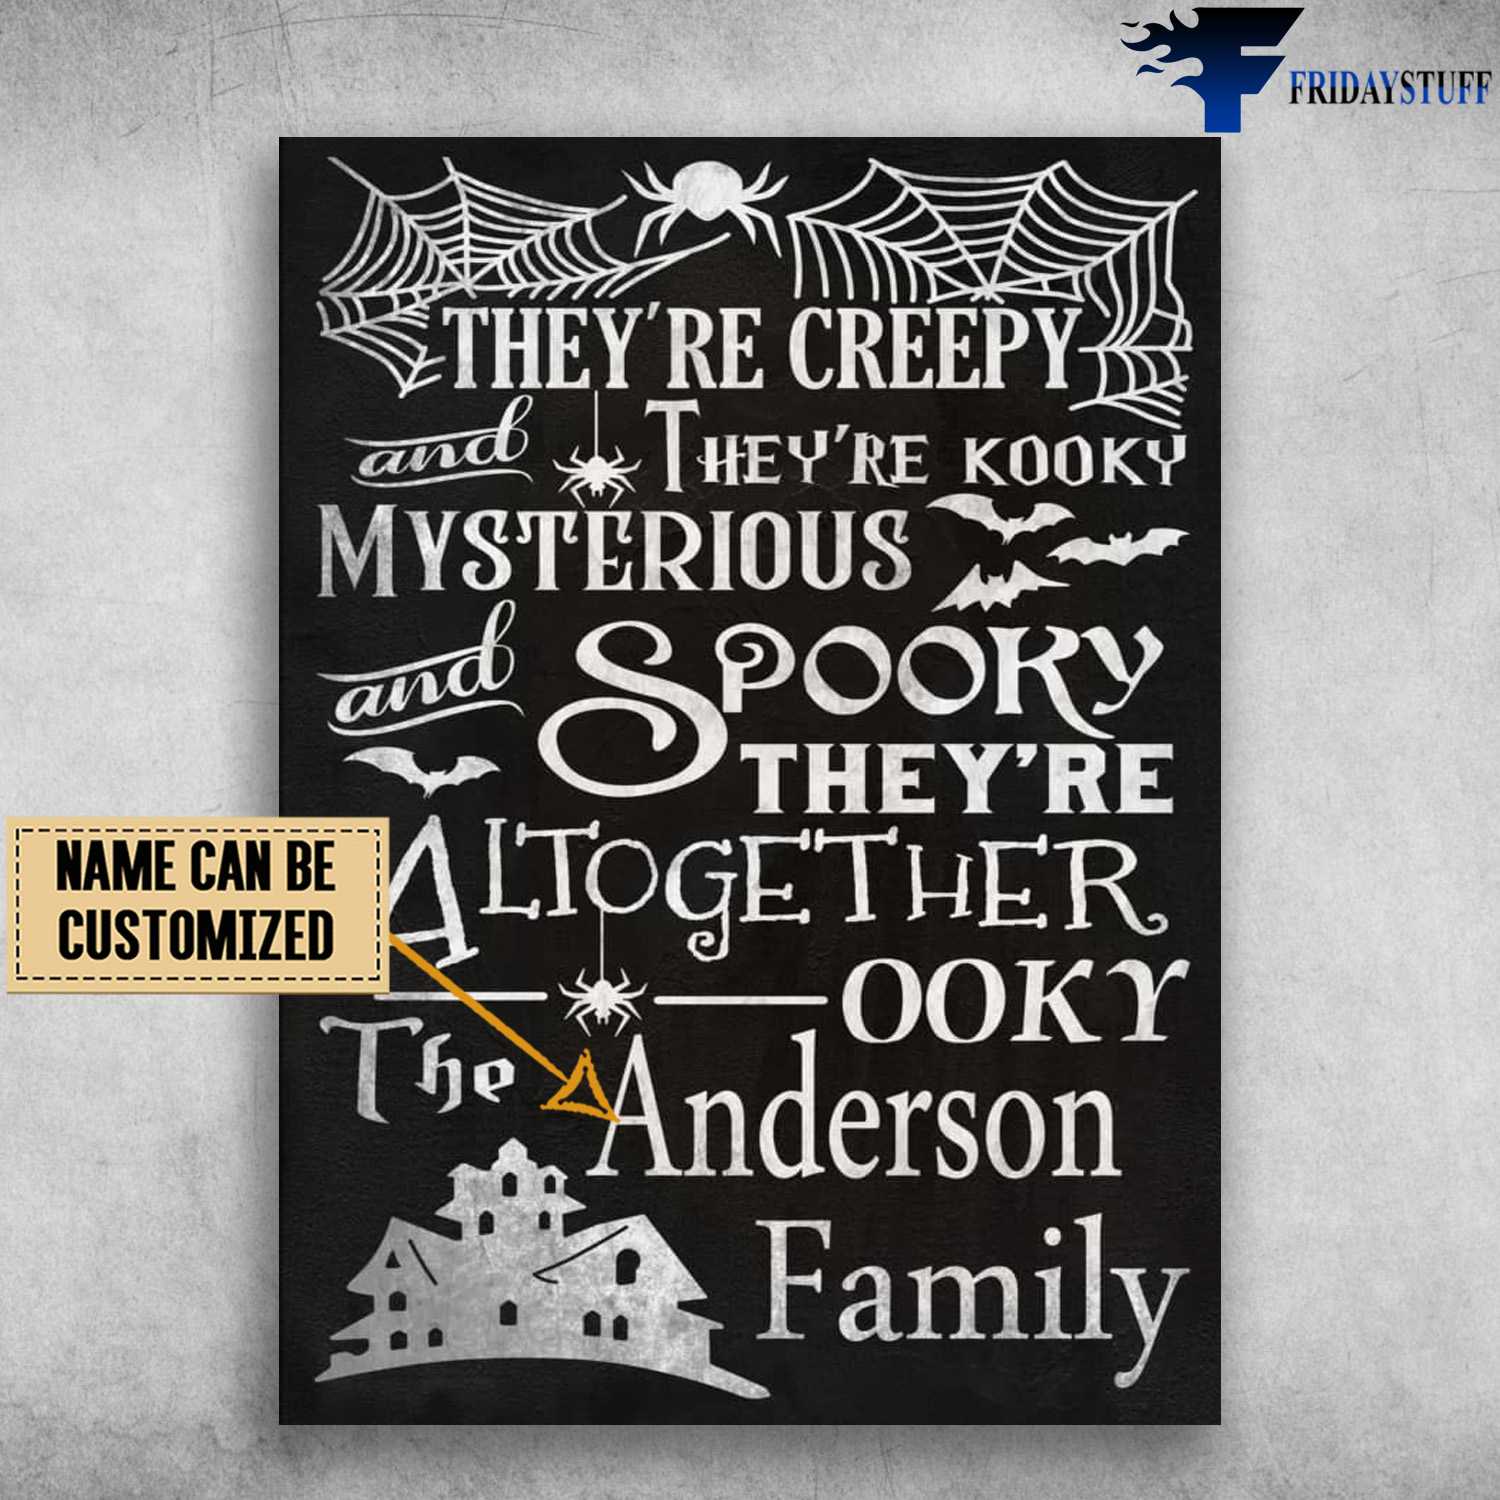 Halloween Poster, They're Creepy, And They're Kooky, Mysterious And Spooky, They're Altogether